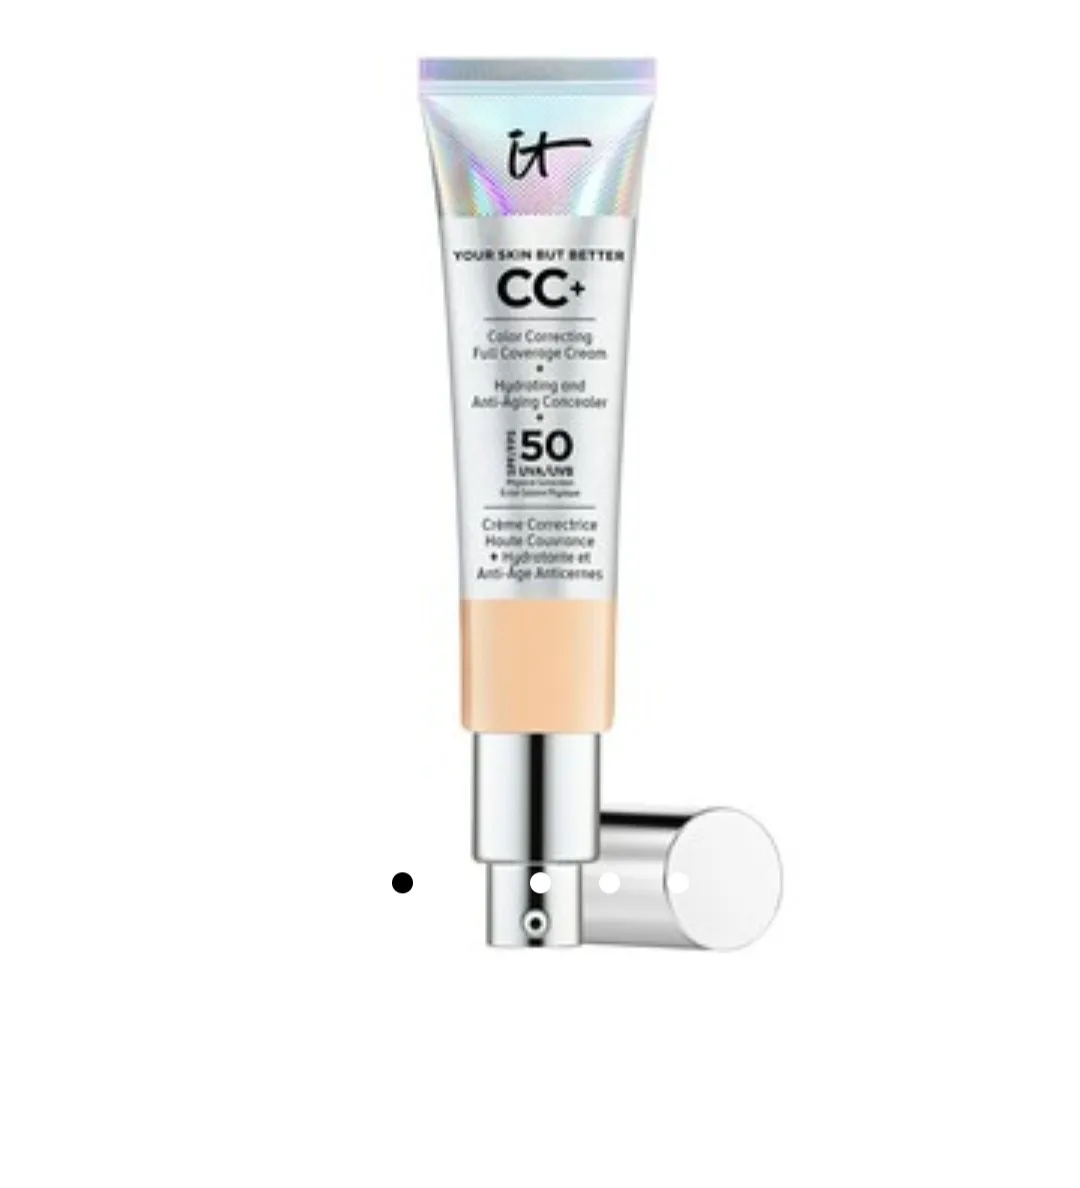 IT Cosmetics S3178000 foundationmake-up Koker Crème 32 ml - review image